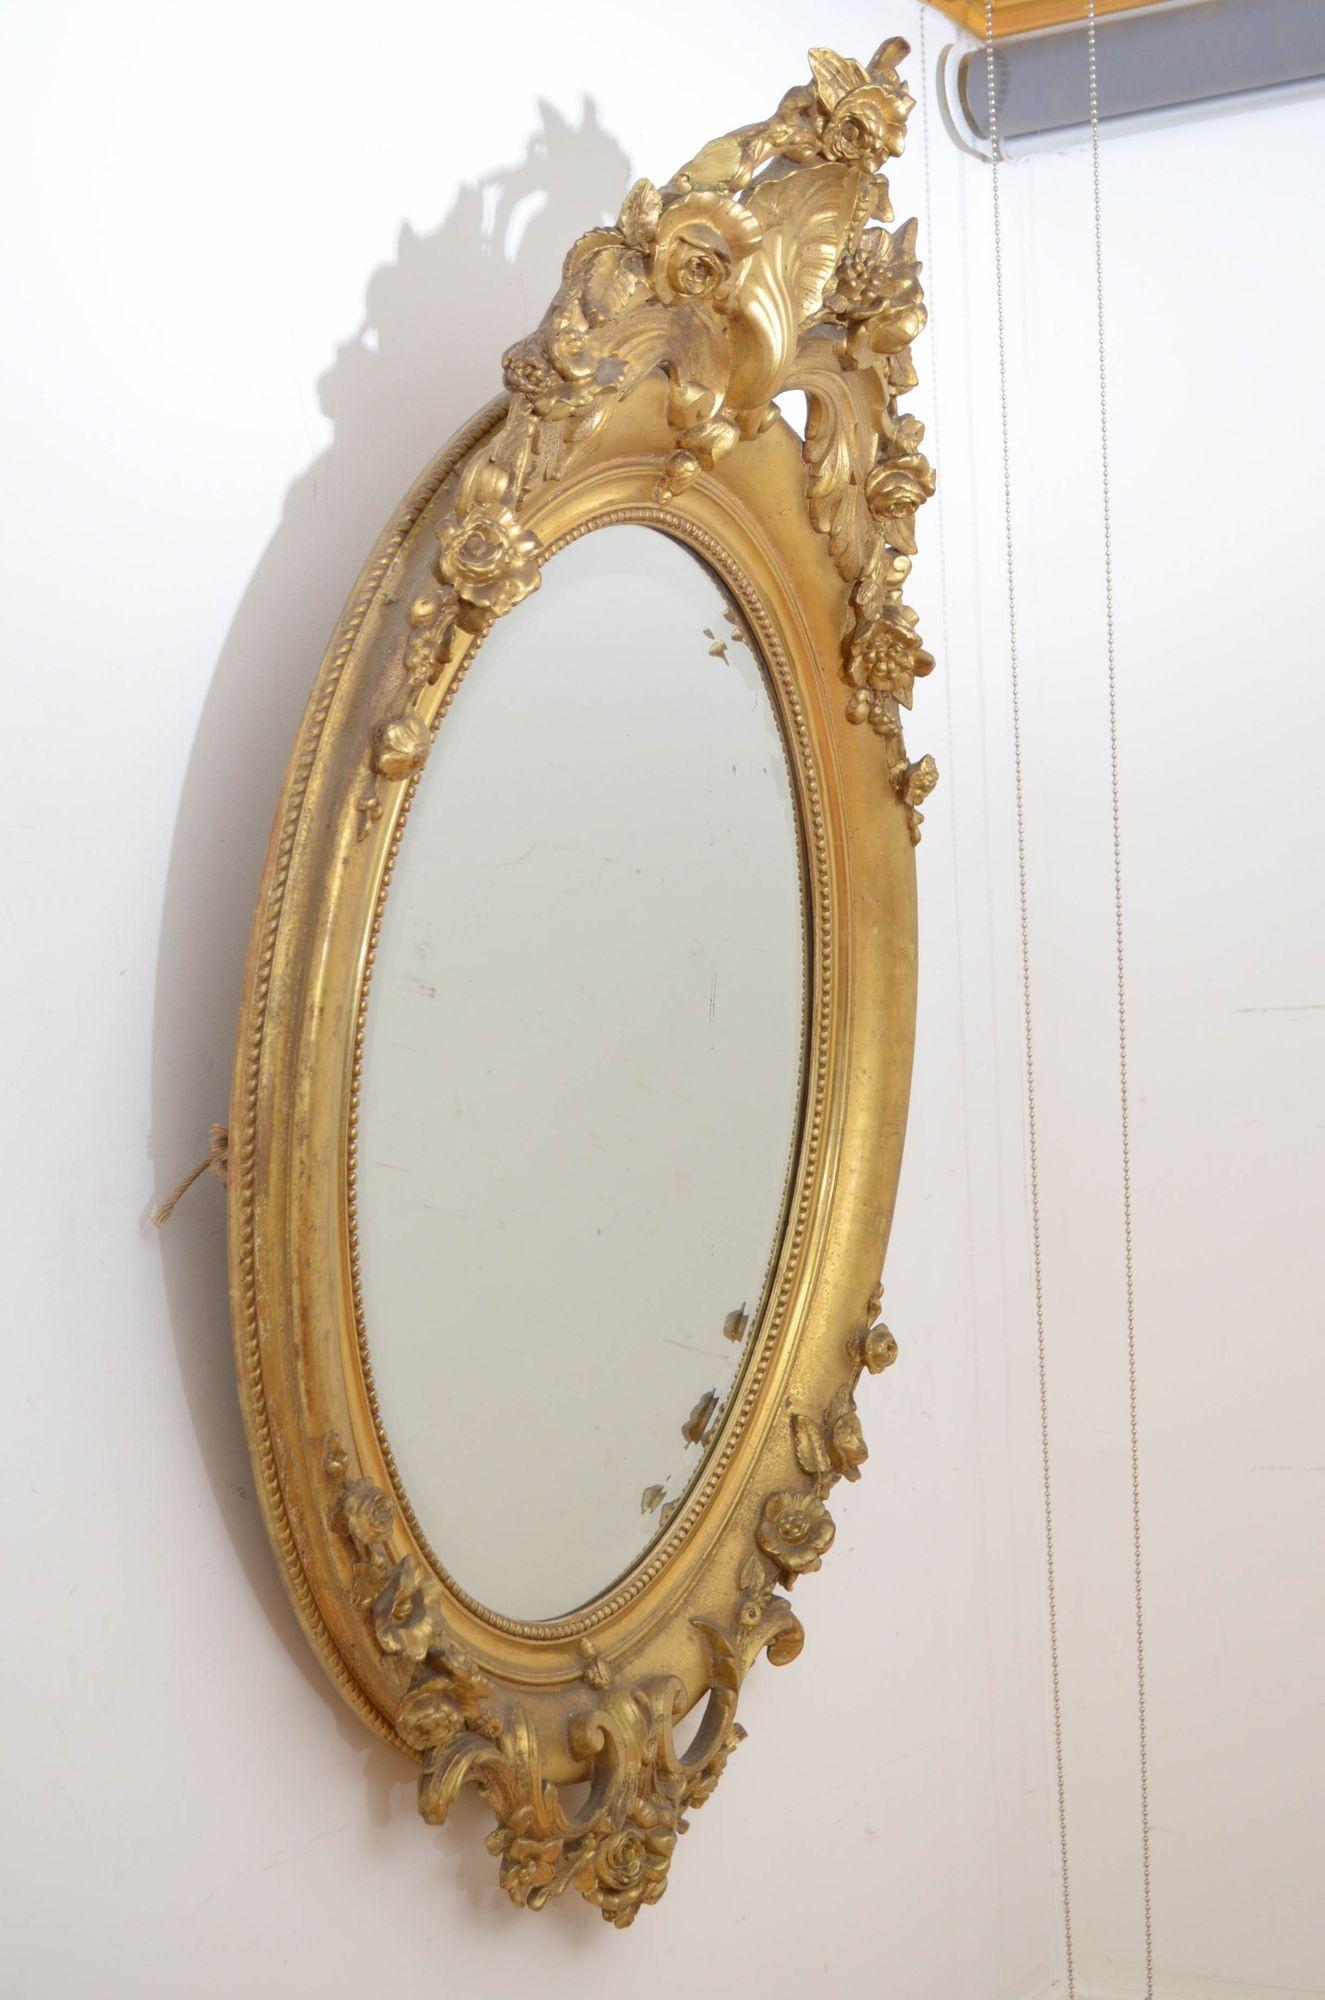 Sn5396 Superb XIXth century French gilded wall mirror, having original bevelled edge glass with minor imperceptions in moulded and beaded giltwood frame with shell crest to the centre flanked by floral swags, the base with floral crest and scrolls.